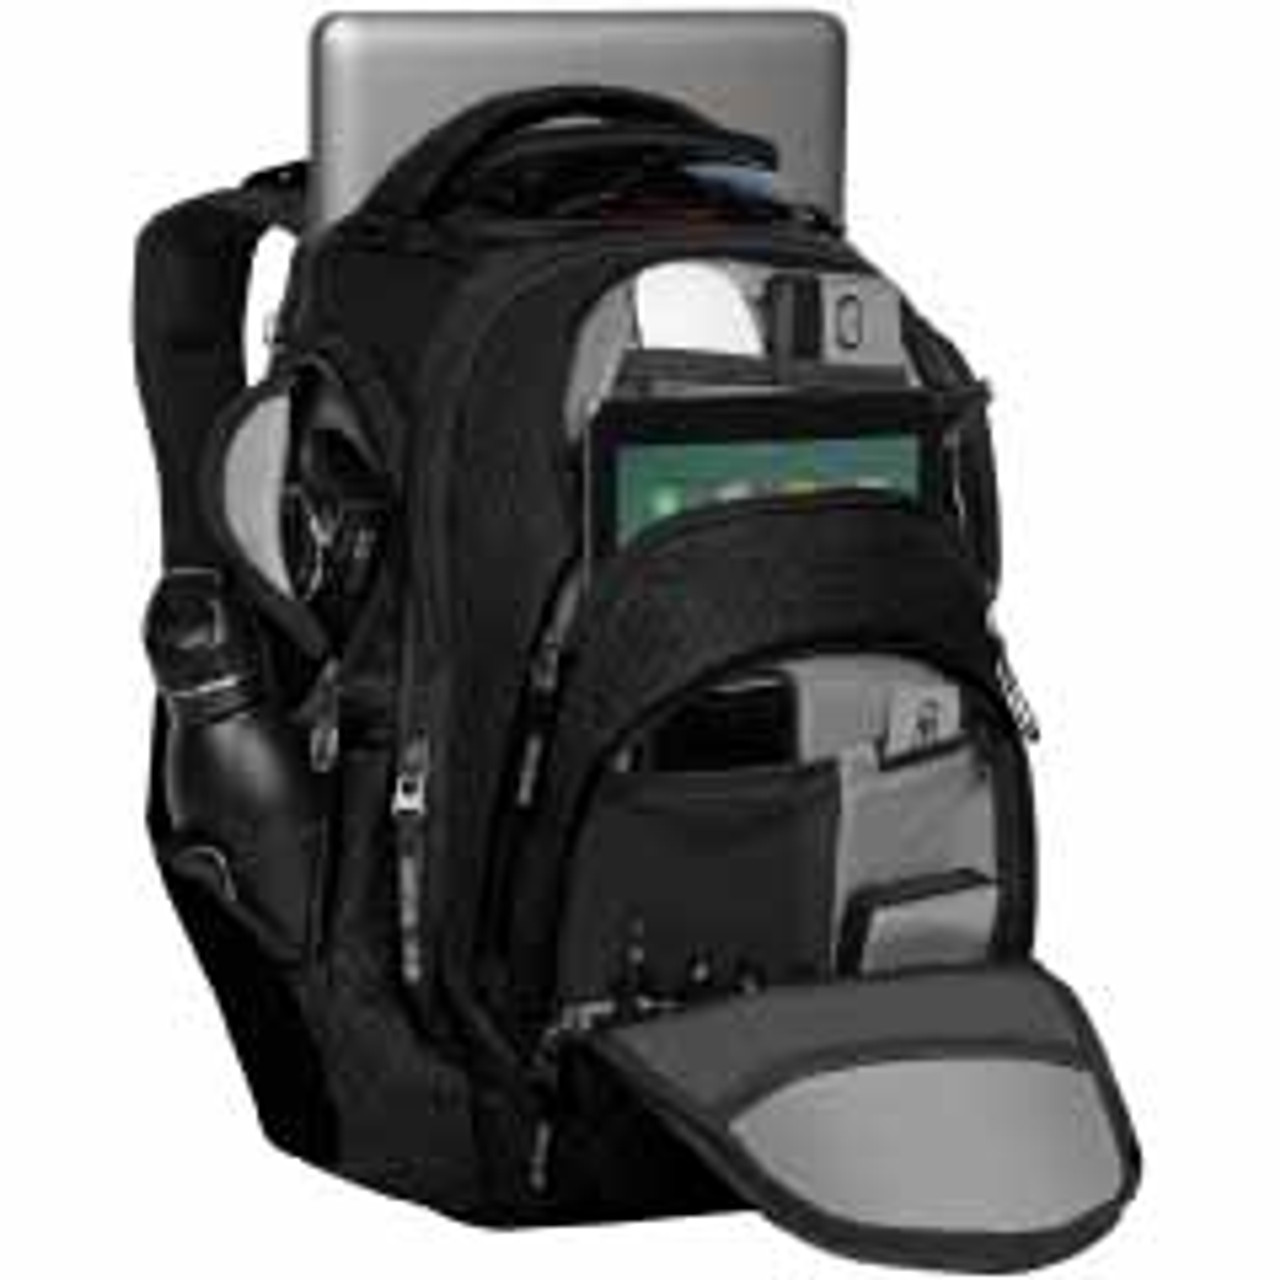 Ogio Rev Laptop Backpack is a fully-loaded pack that can handle any situation